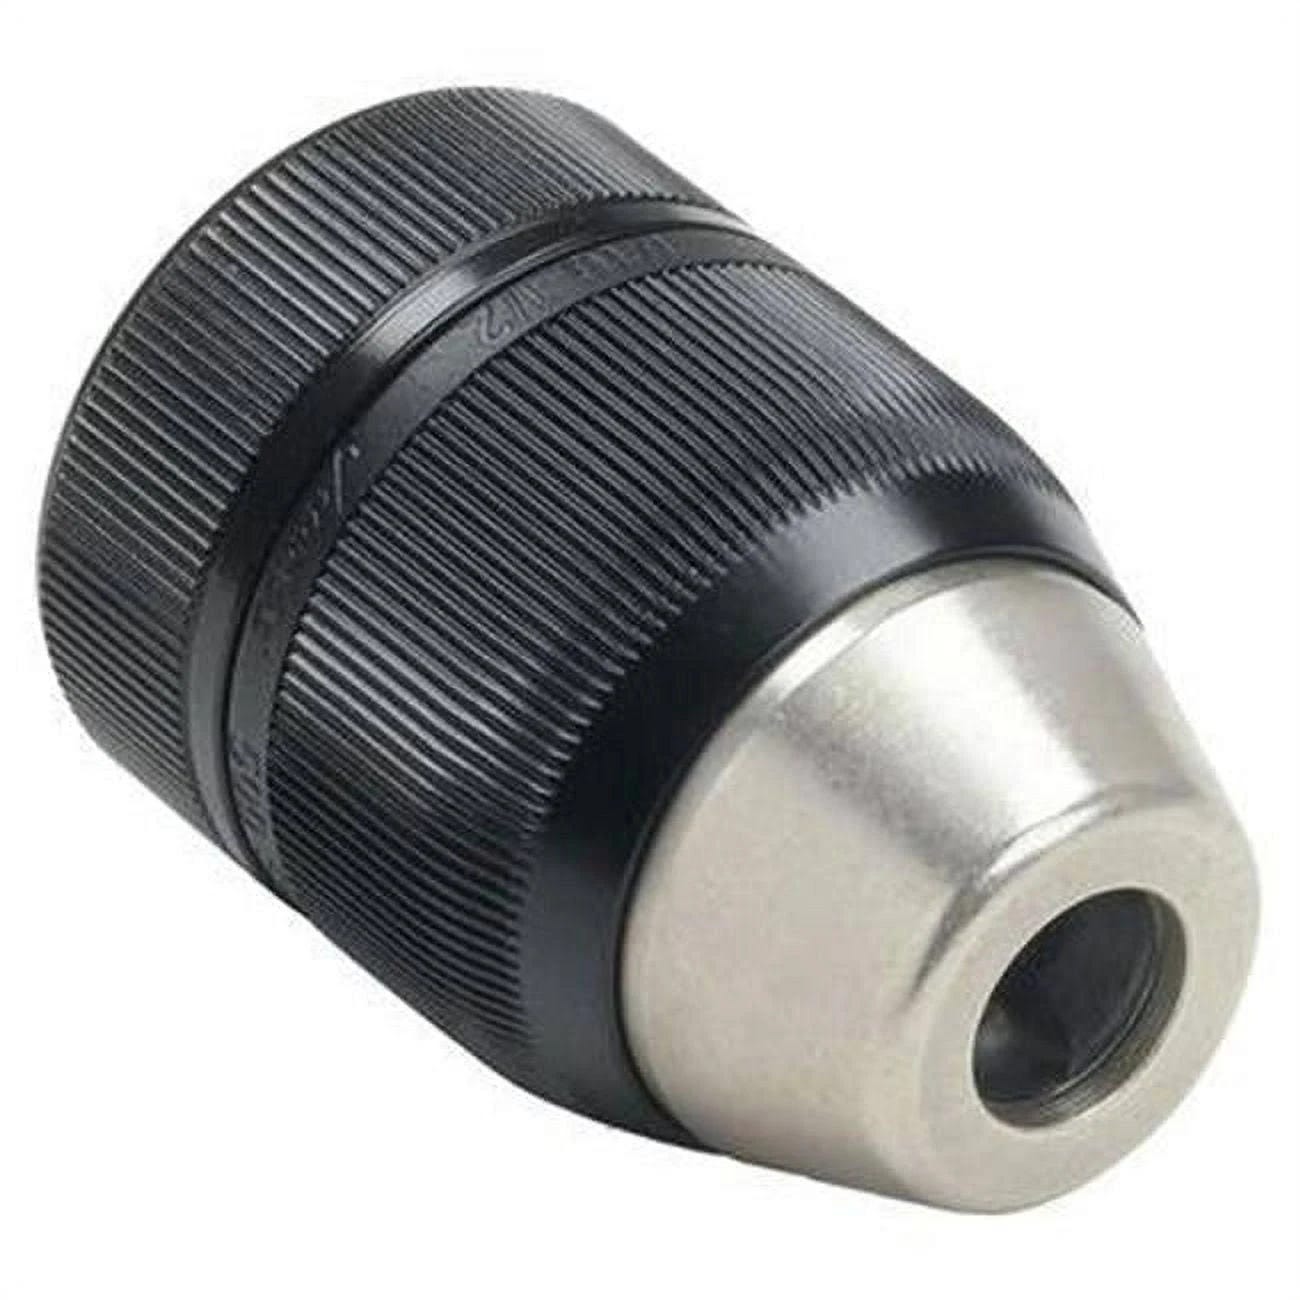 Jacobs Keyless Drill Chuck for Improved Bitting and Versatility | Image